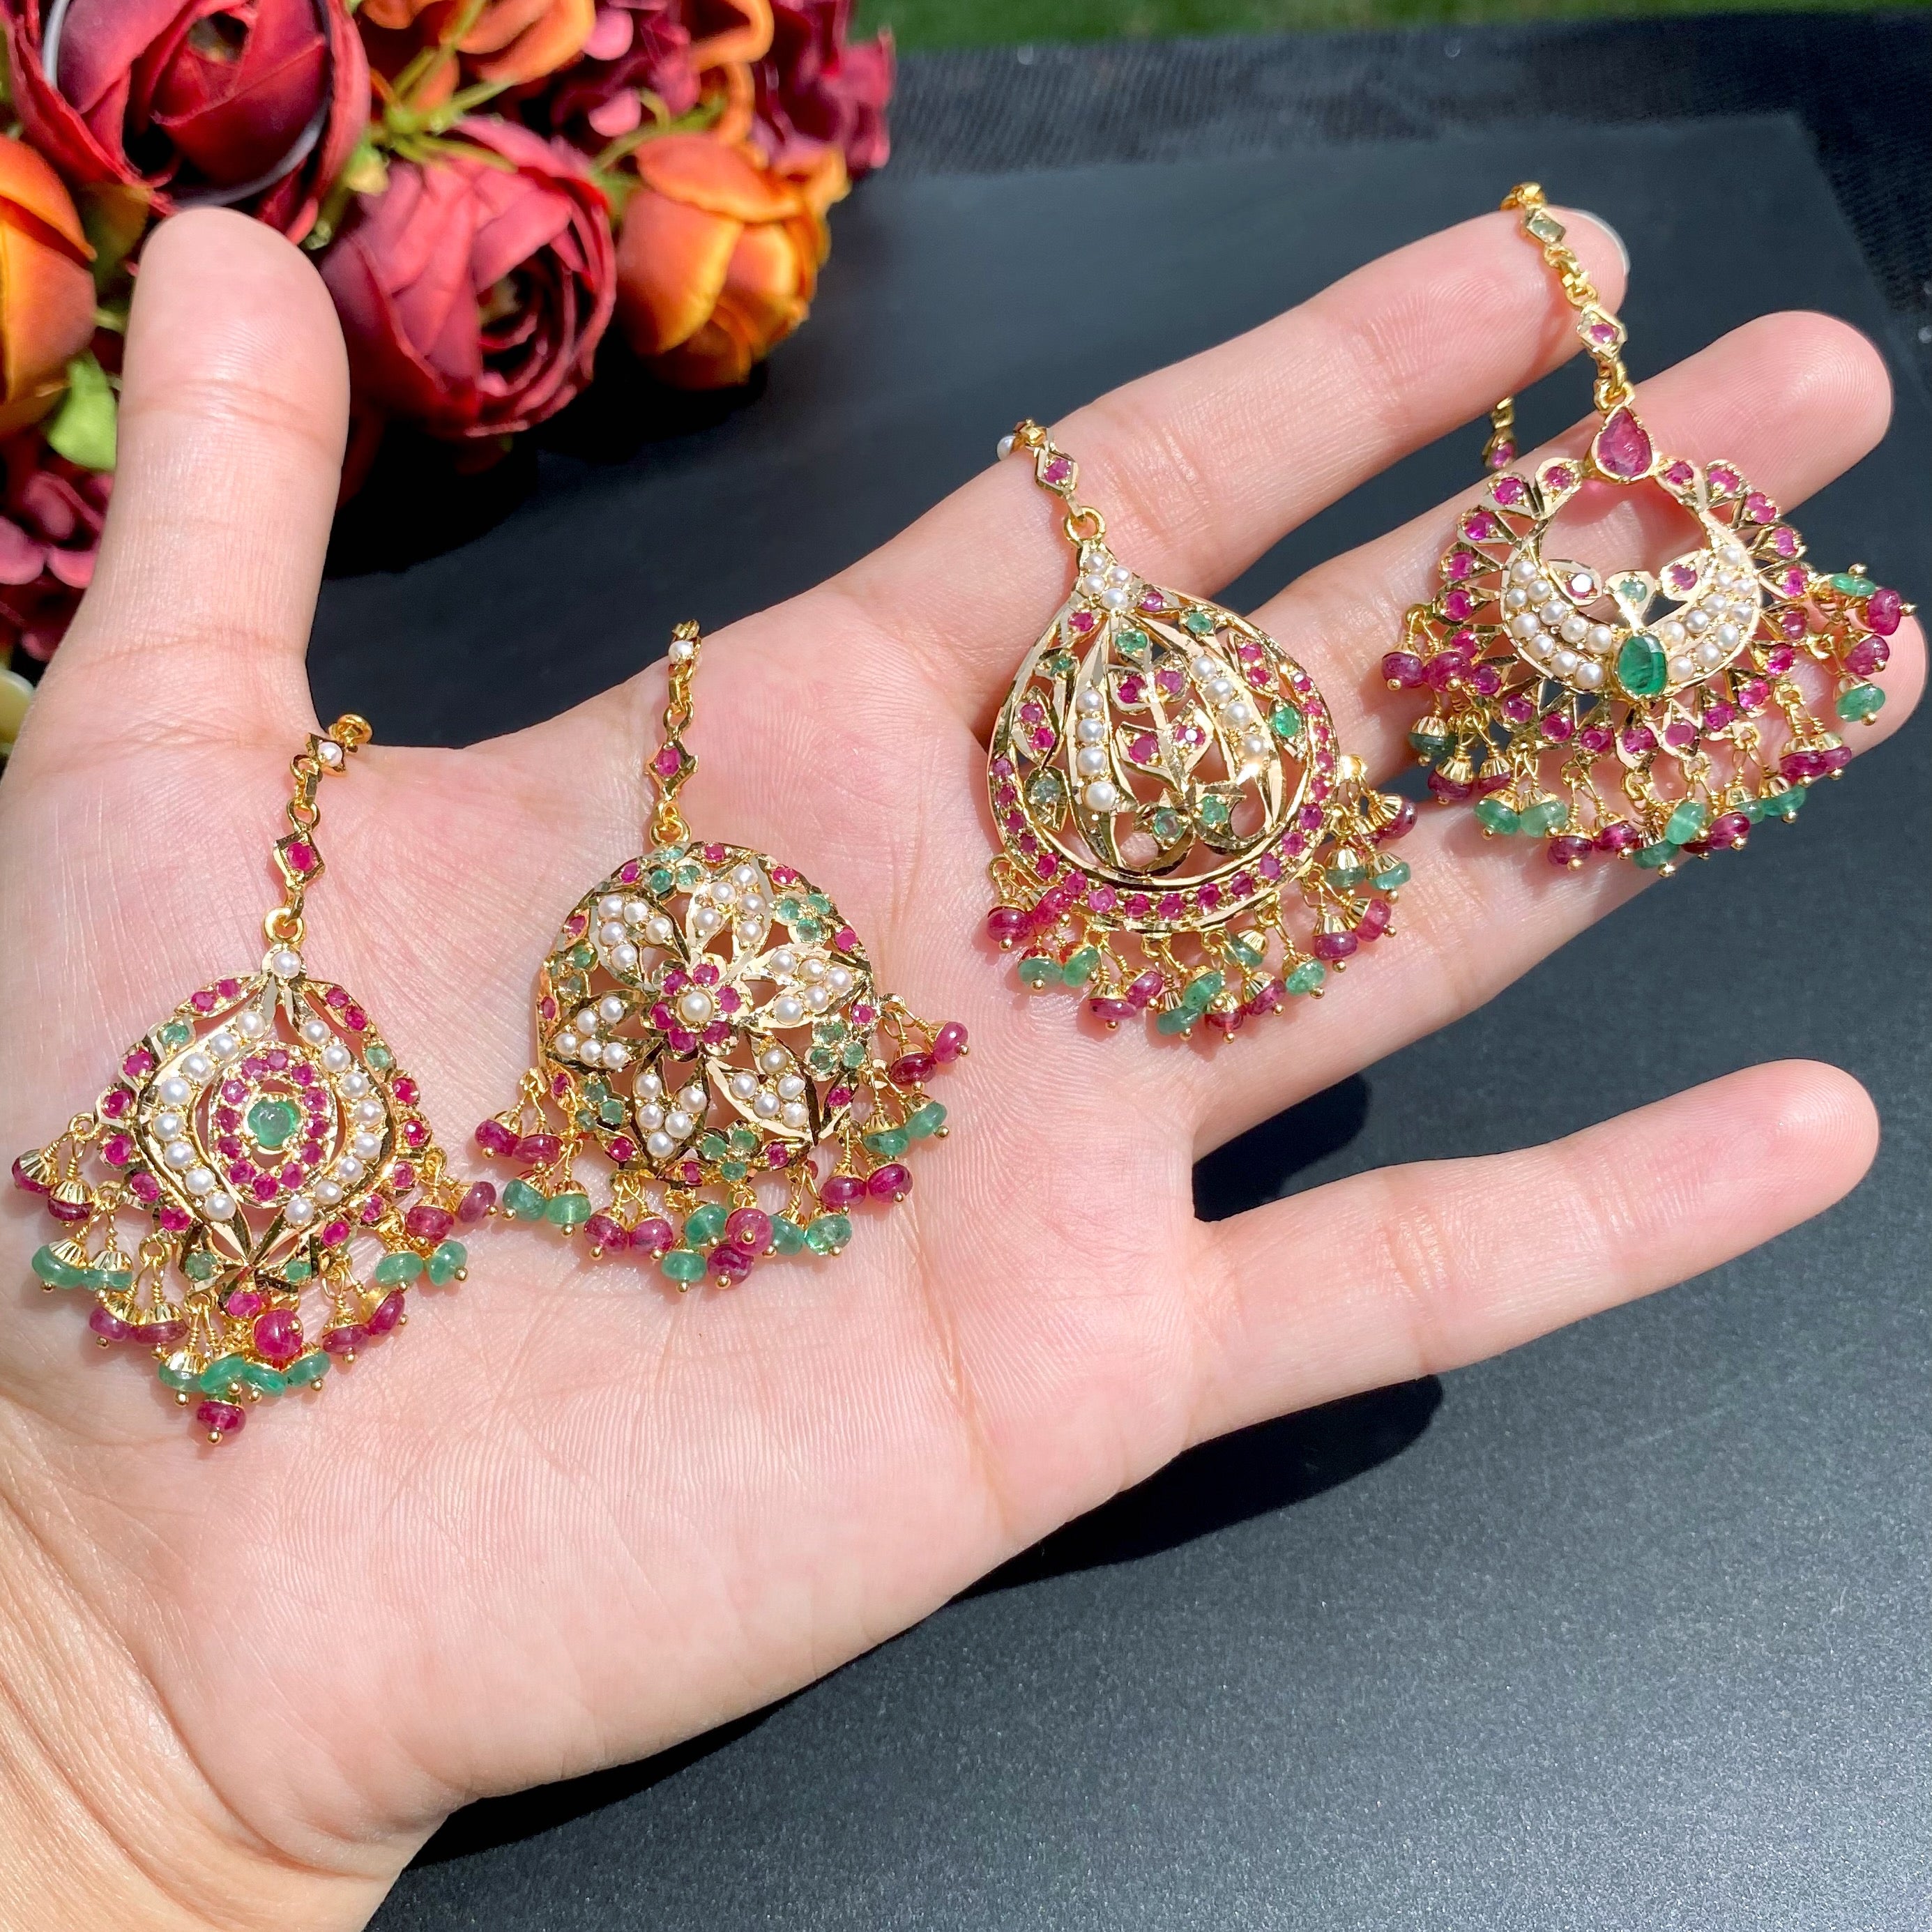 Jadau Mang Teeka in 22k Gold Studded with rubies, emeralds and pearls using Traditional Indian Jadau Jewelry Technique GTK 009